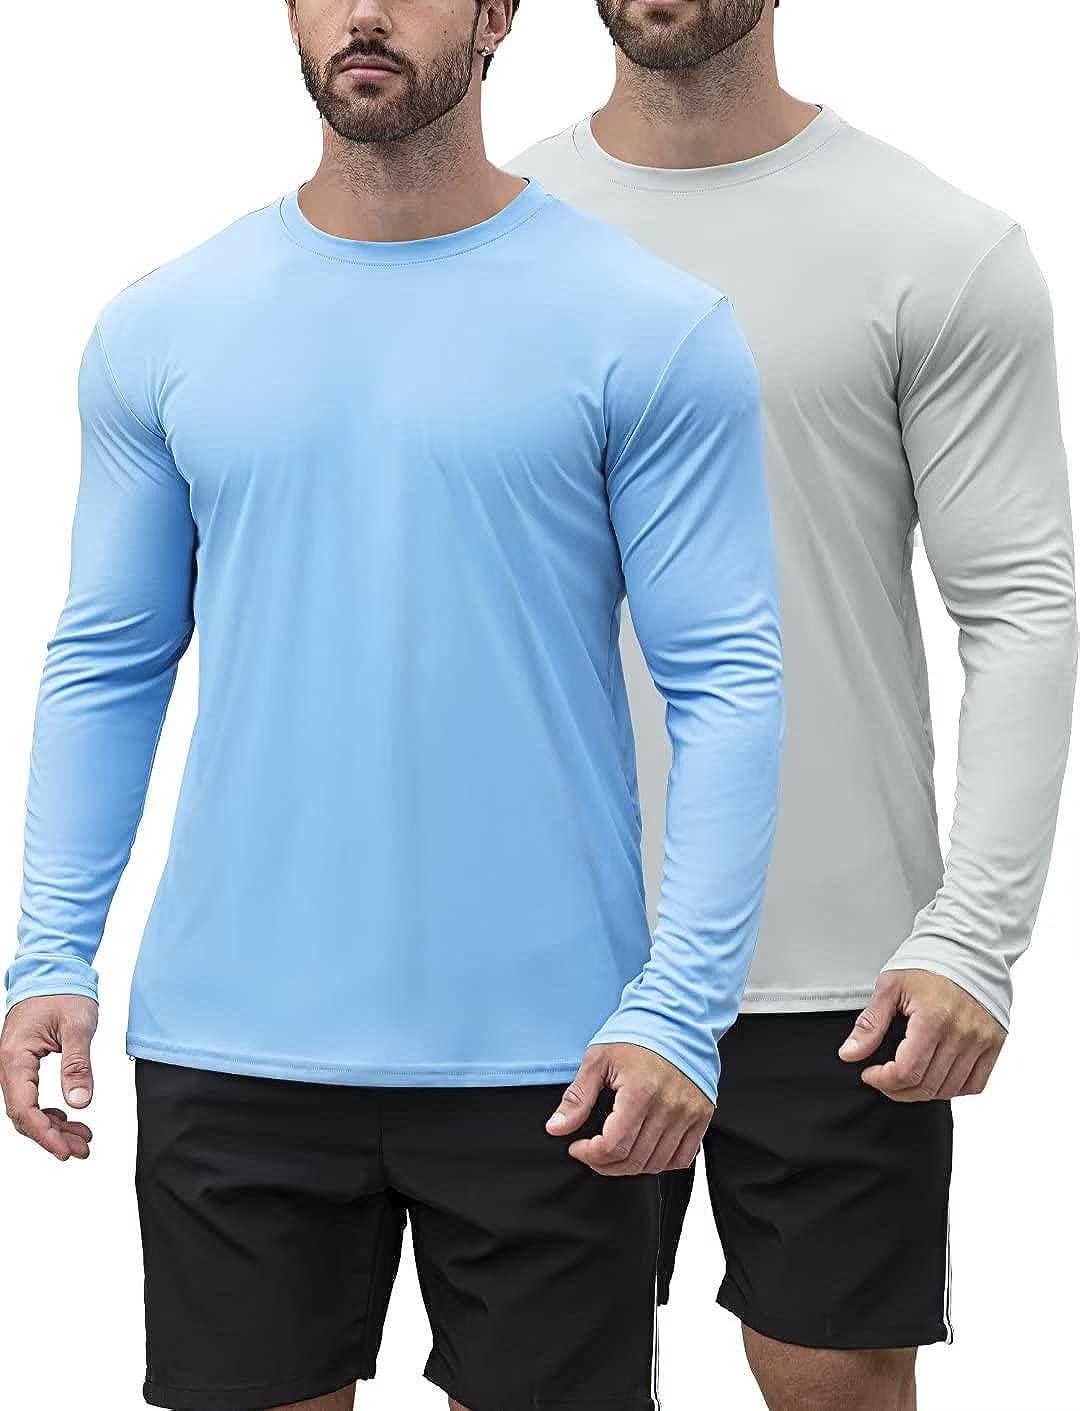 Uv Protection Shirts For Men WholeSale - Price List, Bulk Buy at